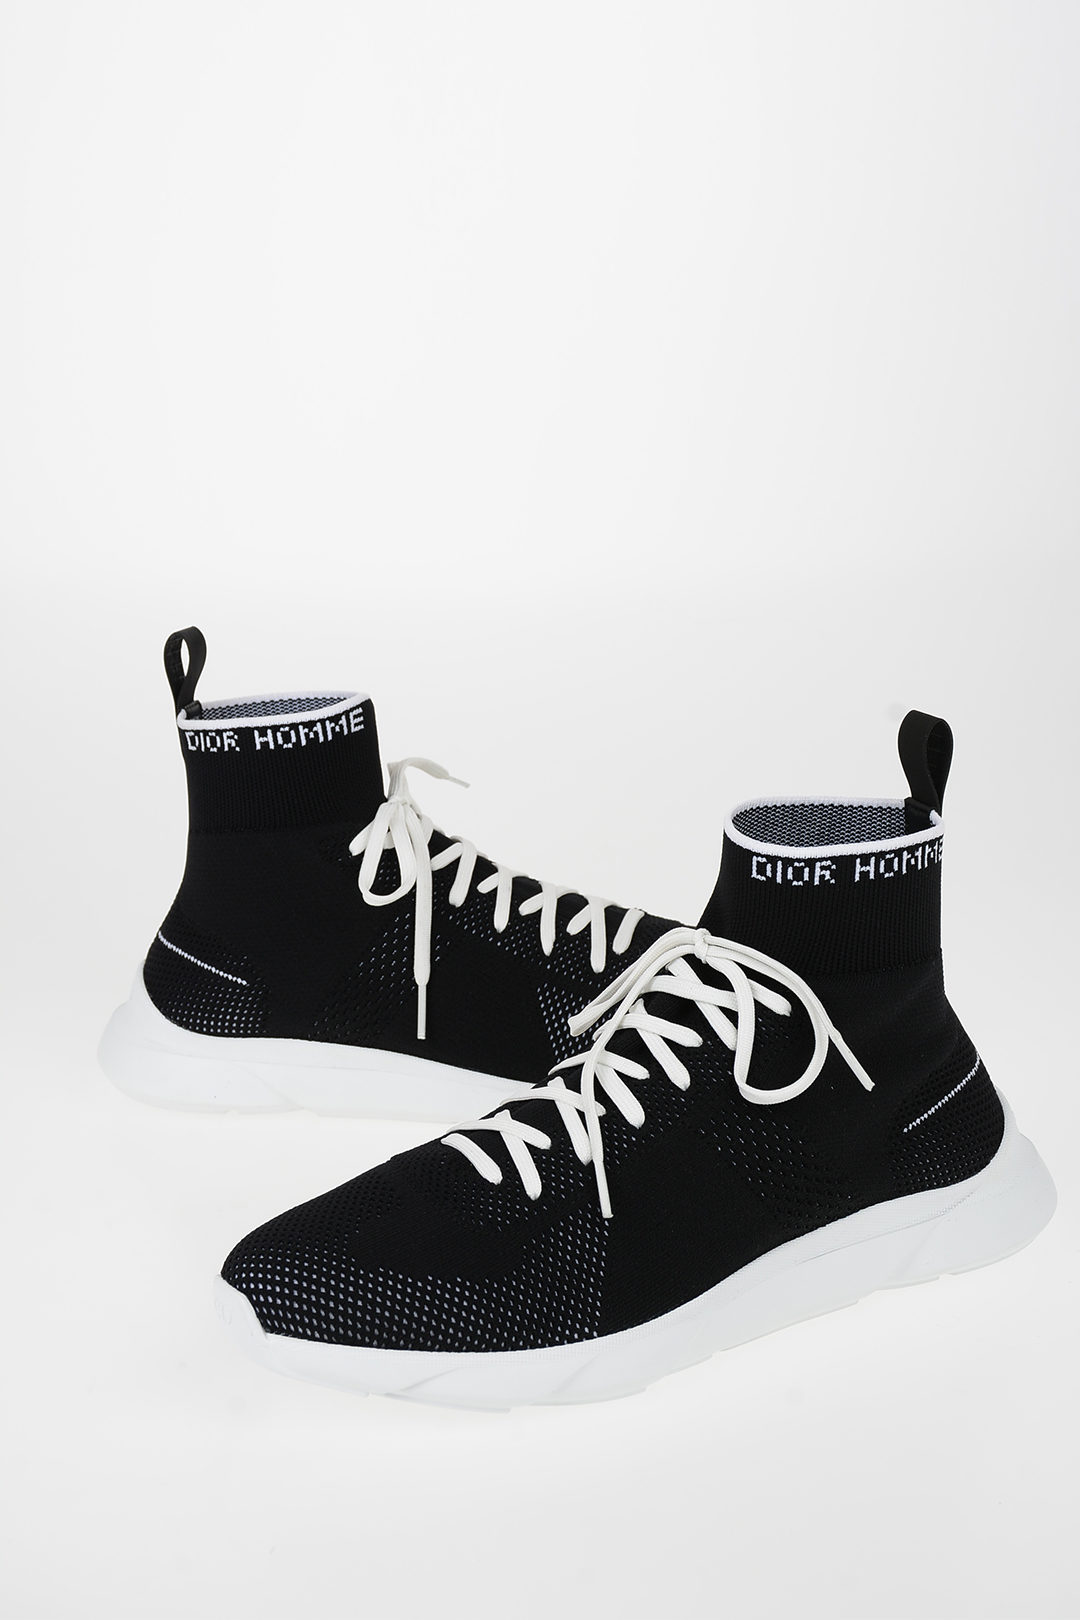 Dior HOMME Fabric Sneakers - Outlet